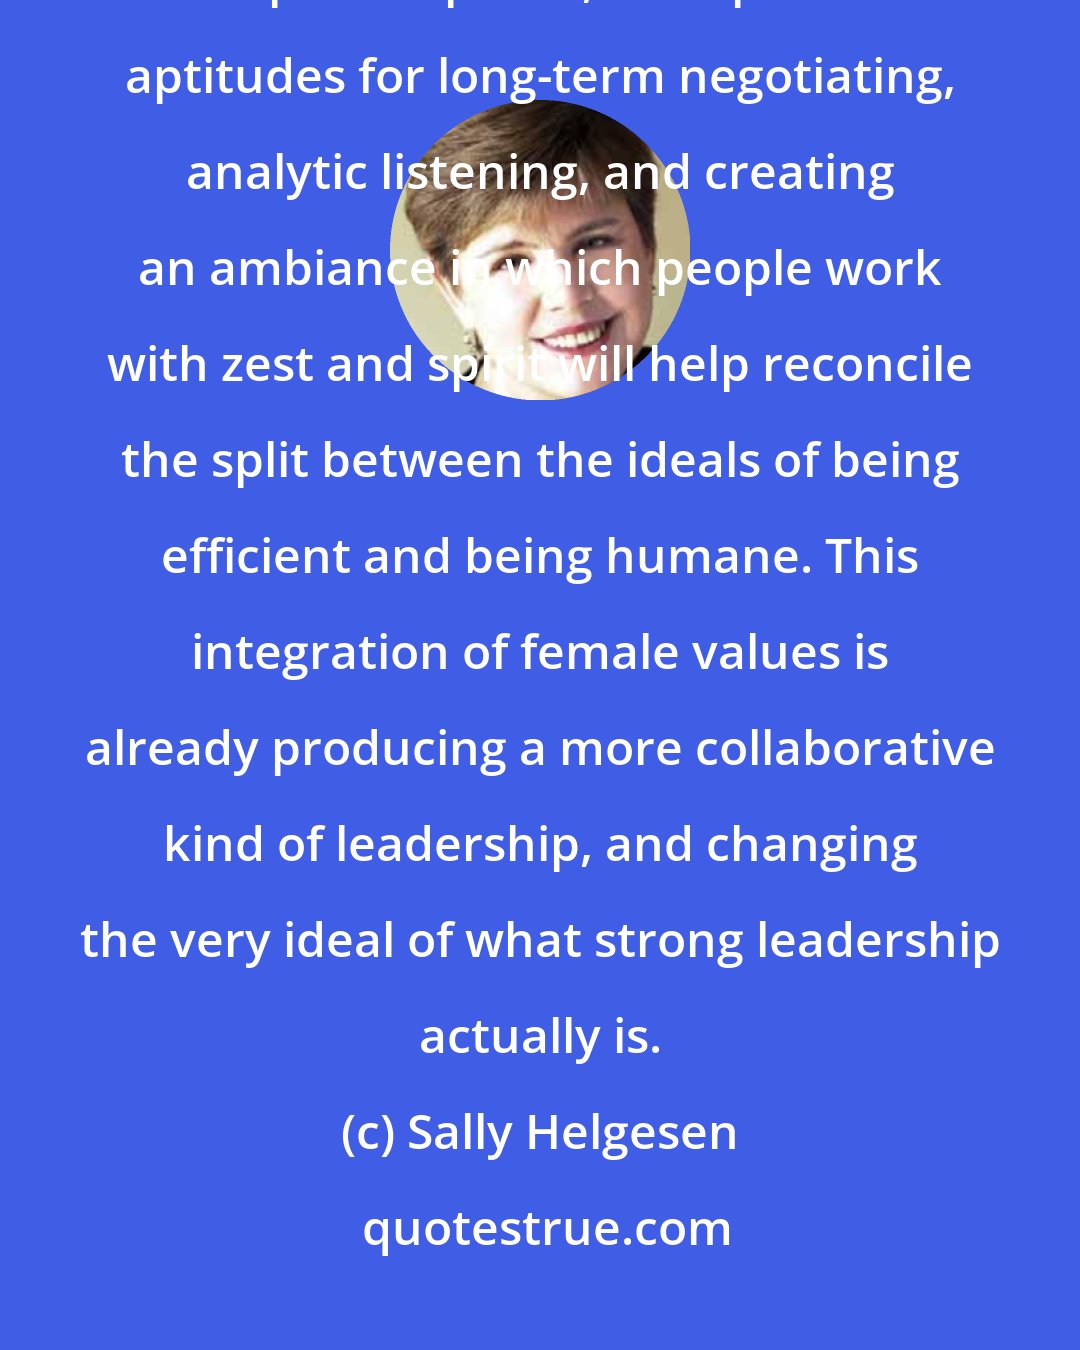 Sally Helgesen: As women's leadership qualities come to play a more dominant role in the public sphere, their particular aptitudes for long-term negotiating, analytic listening, and creating an ambiance in which people work with zest and spirit will help reconcile the split between the ideals of being efficient and being humane. This integration of female values is already producing a more collaborative kind of leadership, and changing the very ideal of what strong leadership actually is.